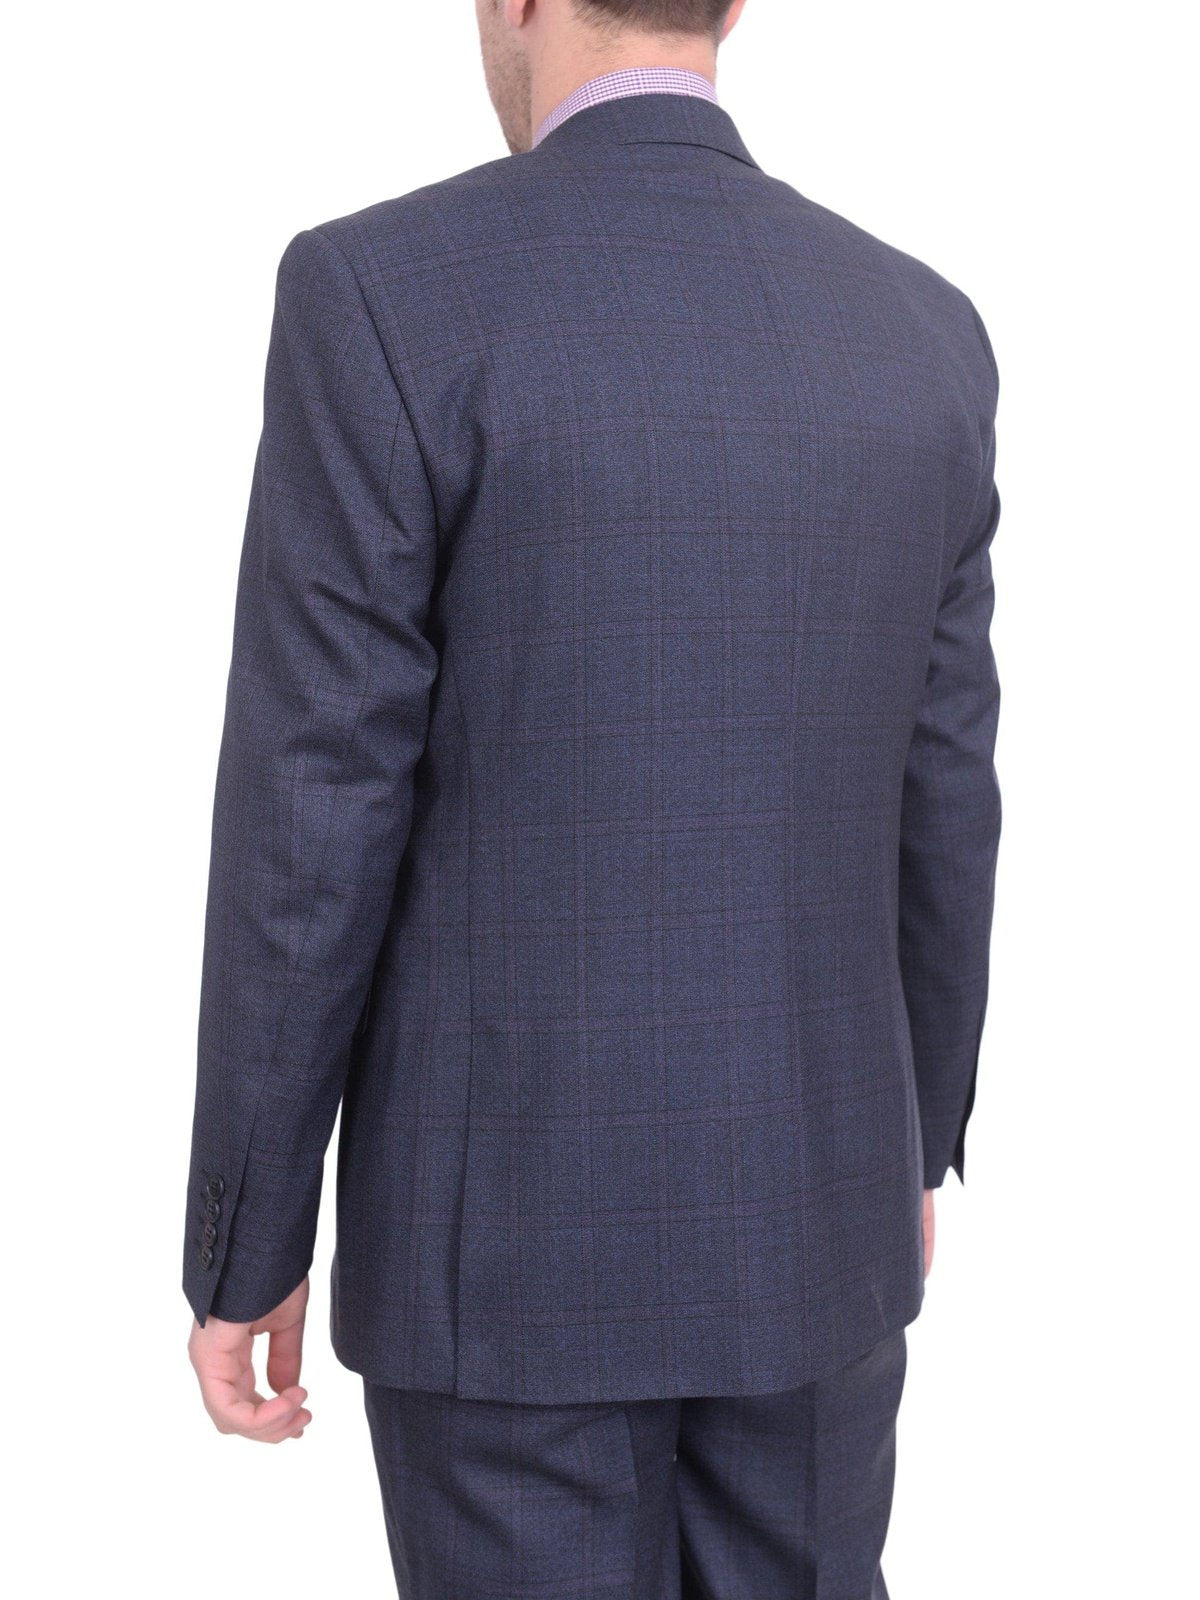 London Fog TWO PIECE SUITS Extra Slim Fit Blue With Purple Windowpane Two Button Wool Suit